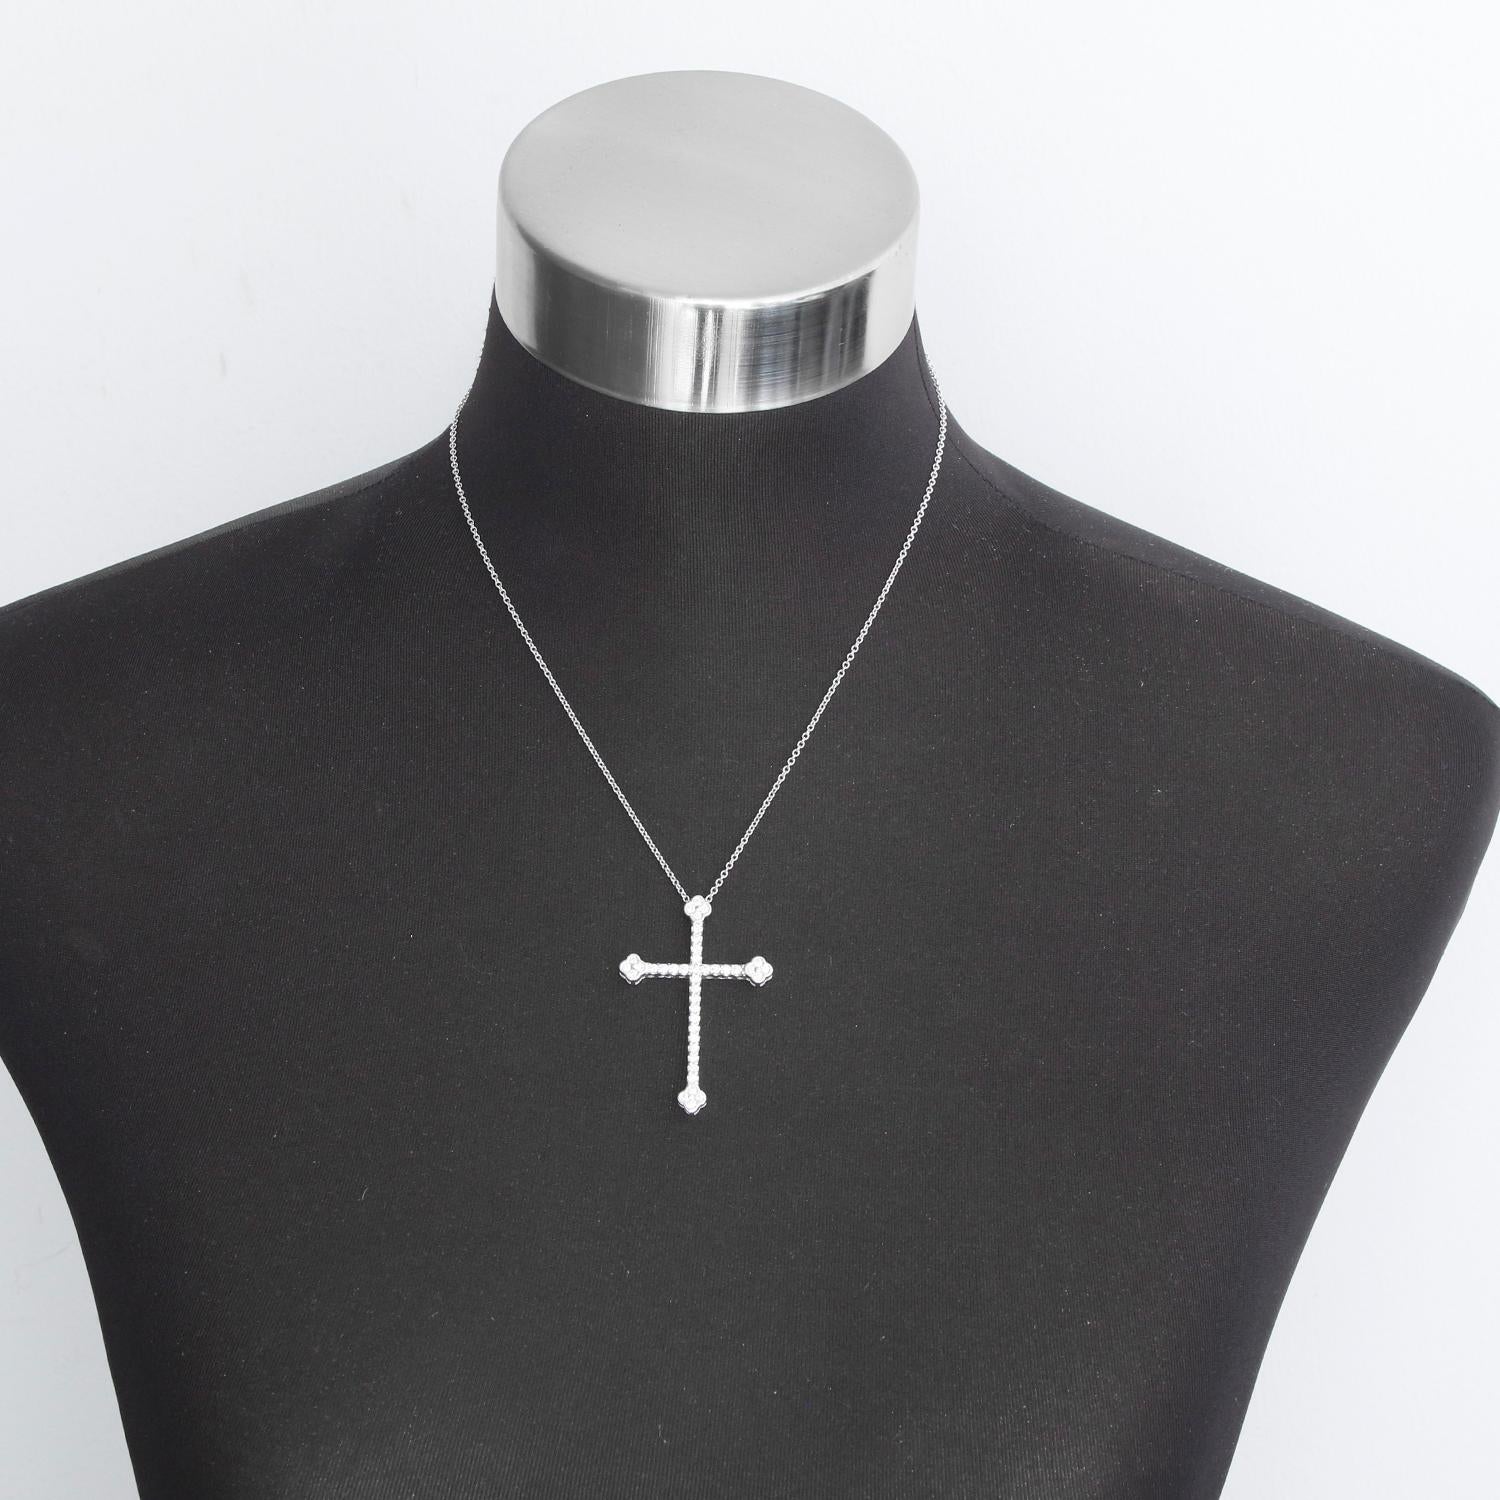 14K White Gold  Diamond Cross with Chain - Beautiful cross weighing 1.3 carats on a 18 inch white gold chain. Cross measures 1.25 inches by 2 inches. Total weight 3.7 grams. Pre-owned with DeMesy box.